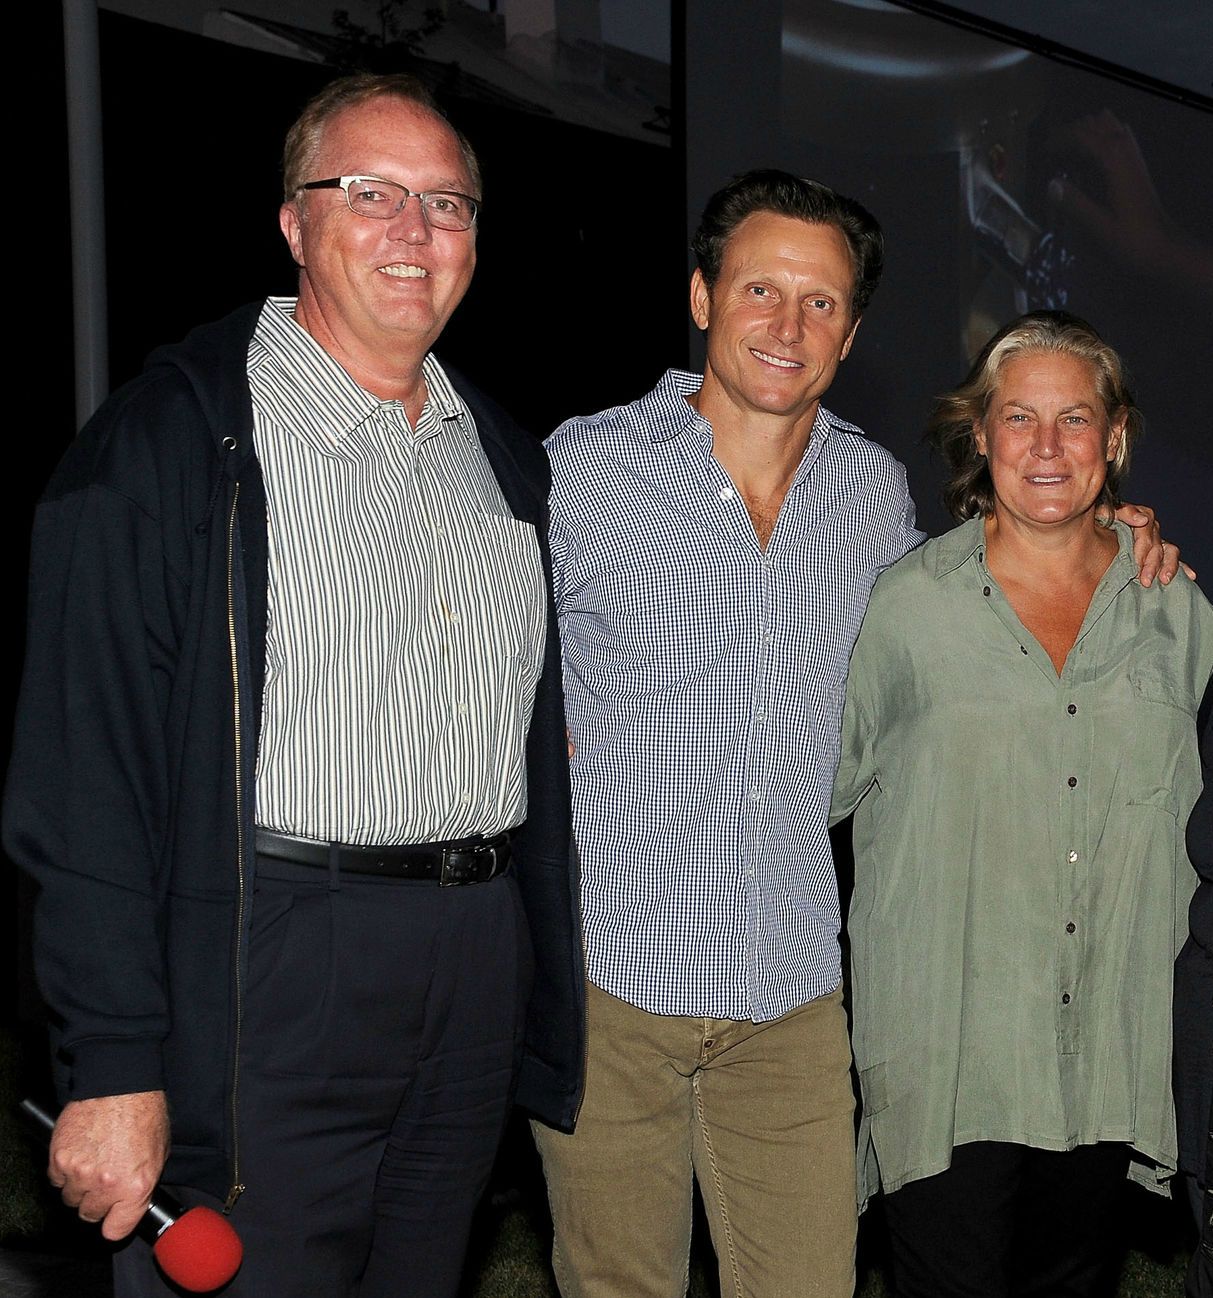 Randy Harborkamp, ​​Tony Goldwyn, Jane Muskie at Academy of Motion Picture Arts and Sciences' Oscar Outdoor Screening "ghost" July 13, 2012 in Hollywood, CA